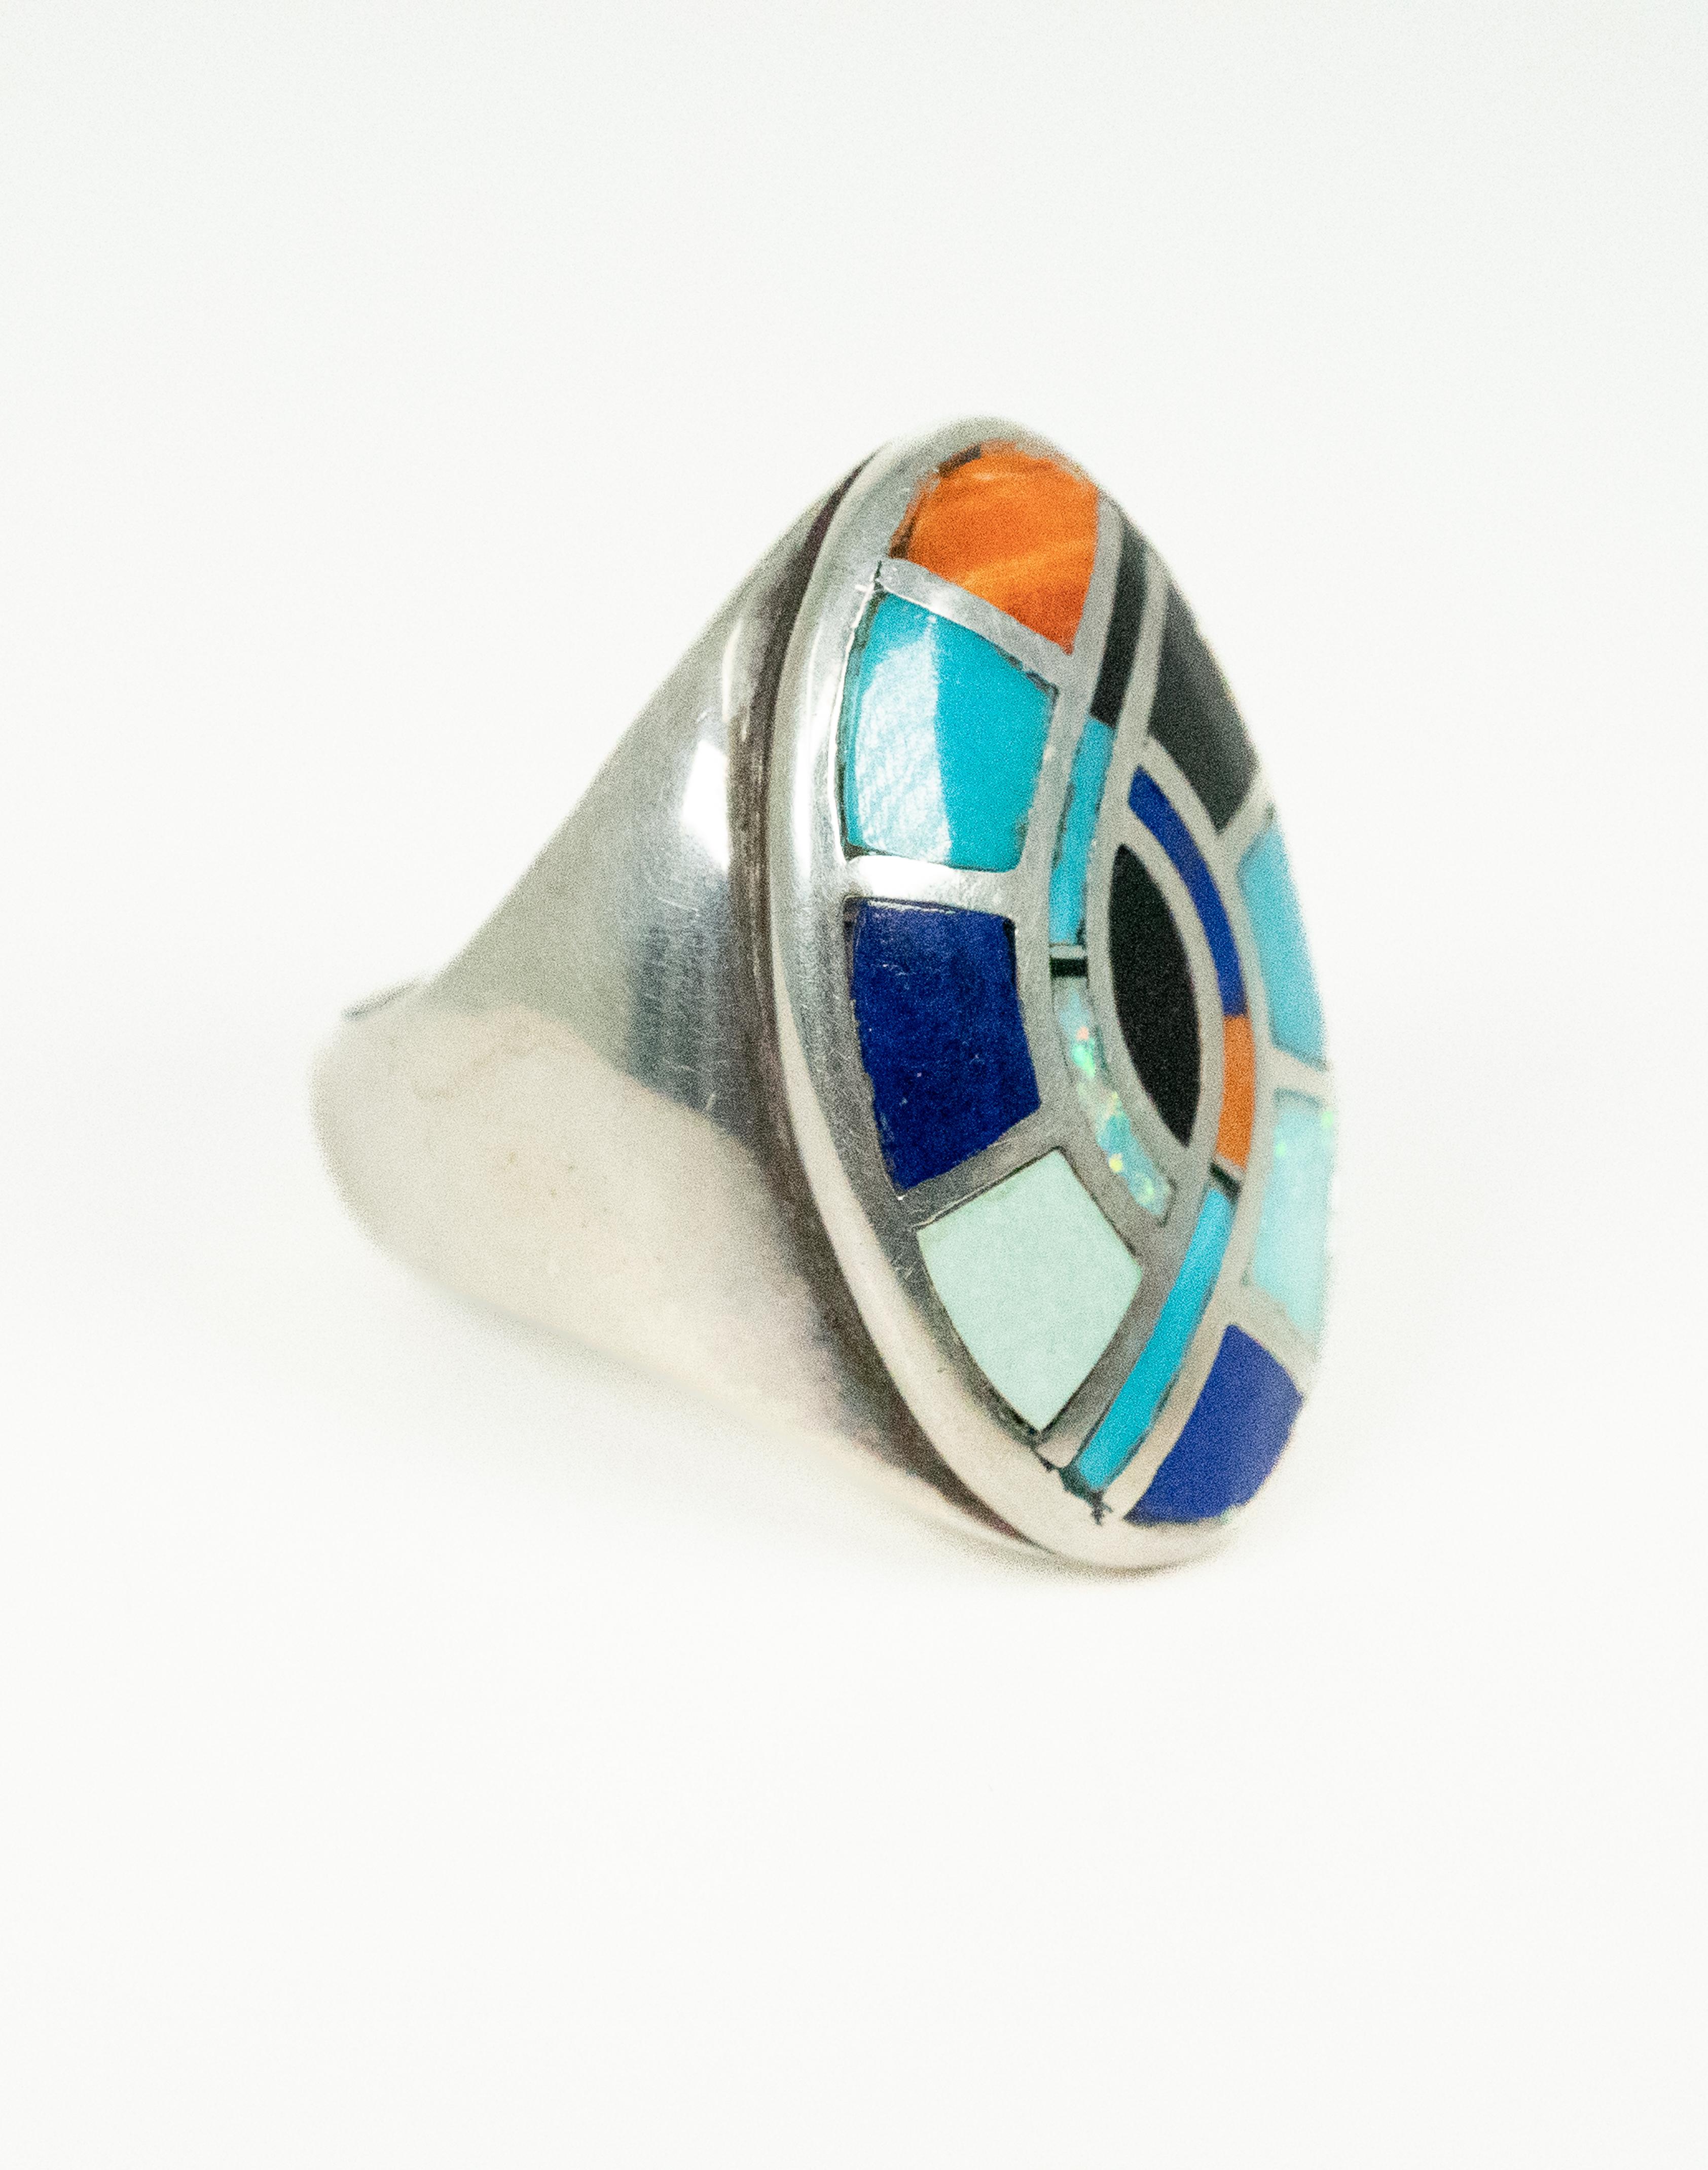 Handmade with beautiful inlays of turquoise, opal, lapis lazuli, onyx  and coral..... this ring is a Stunner!  